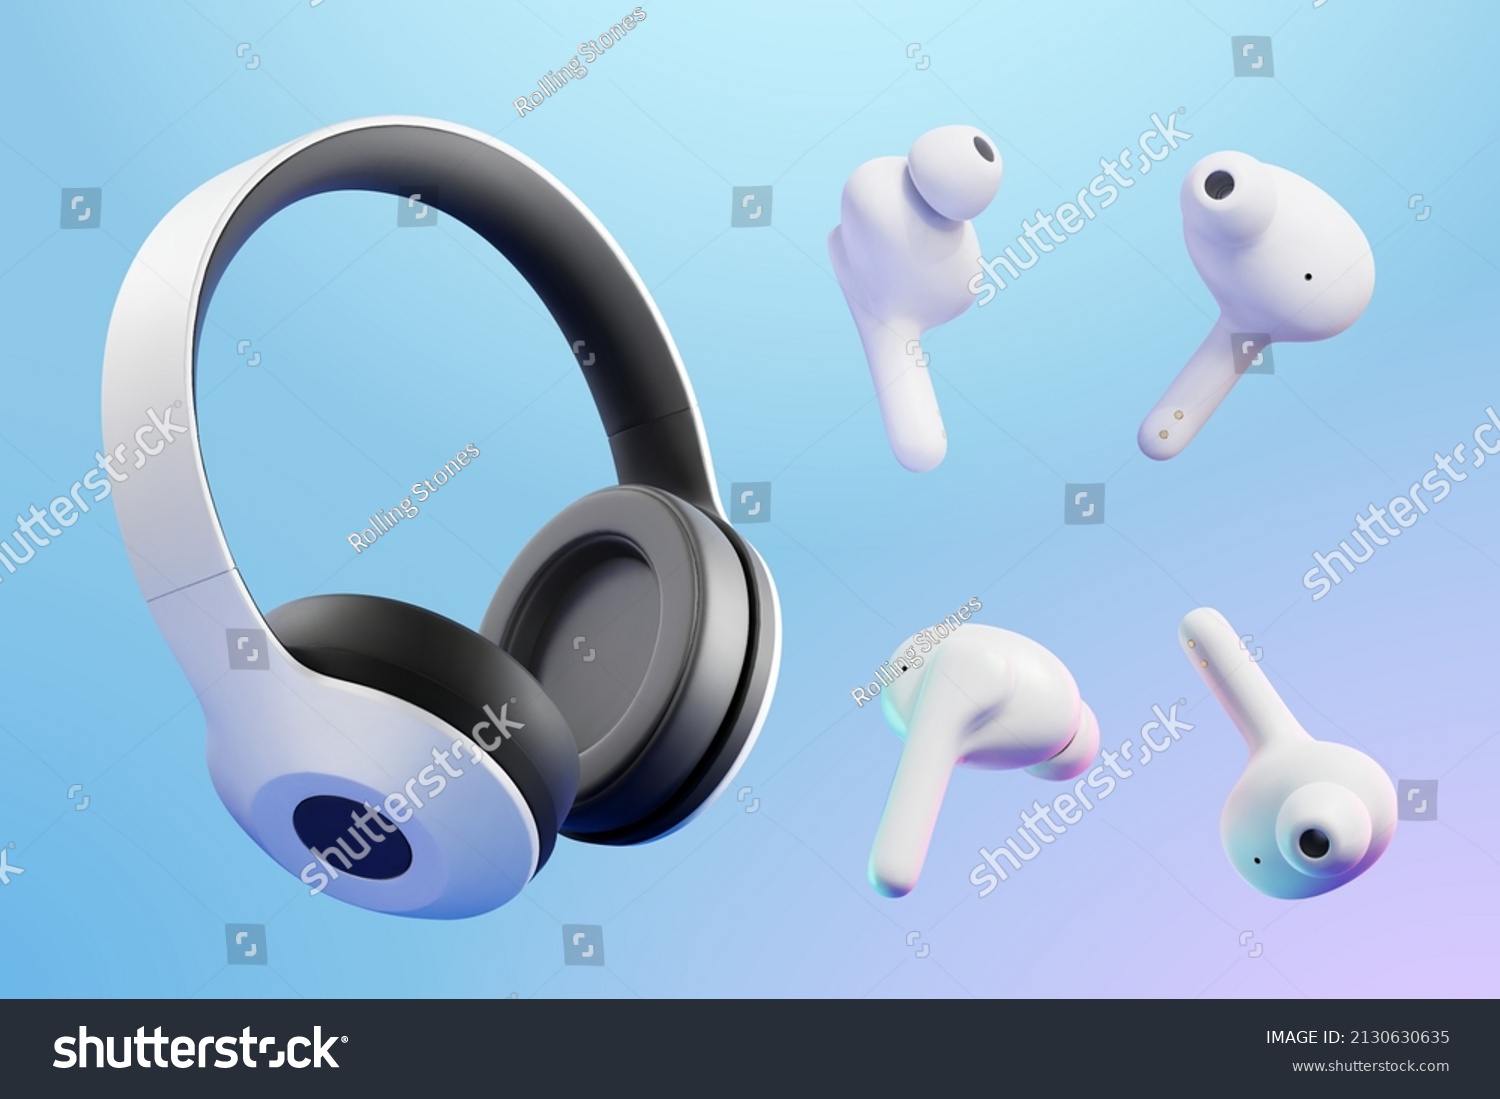 3D wireless headphones mockup. Set of realistic wireless over ear headphones and in ear headphones isolated on blue background #2130630635